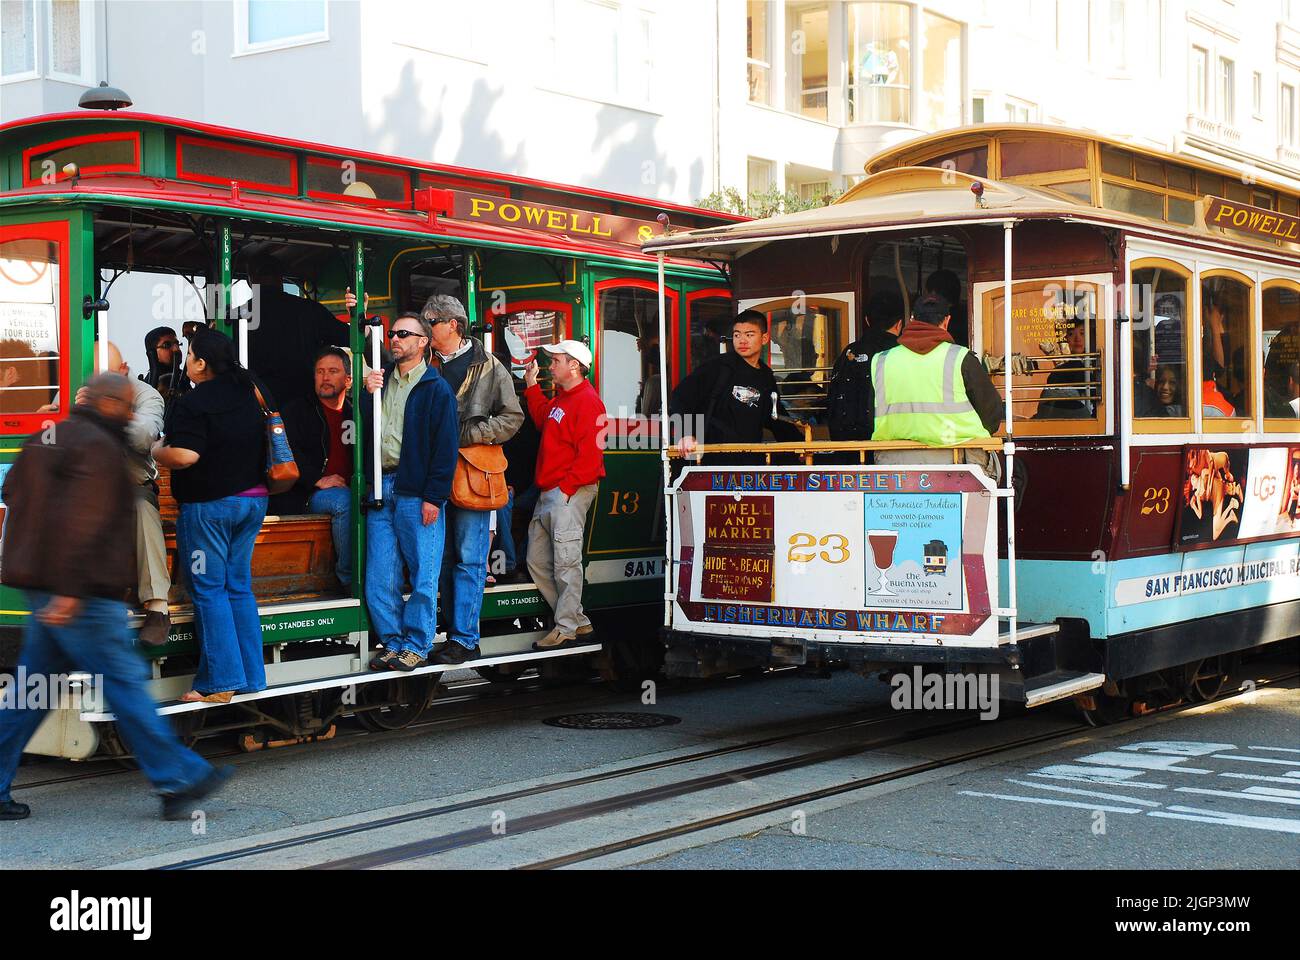 People begin to board a cable car in San Francisco just as another pulls away on the street Stock Photo